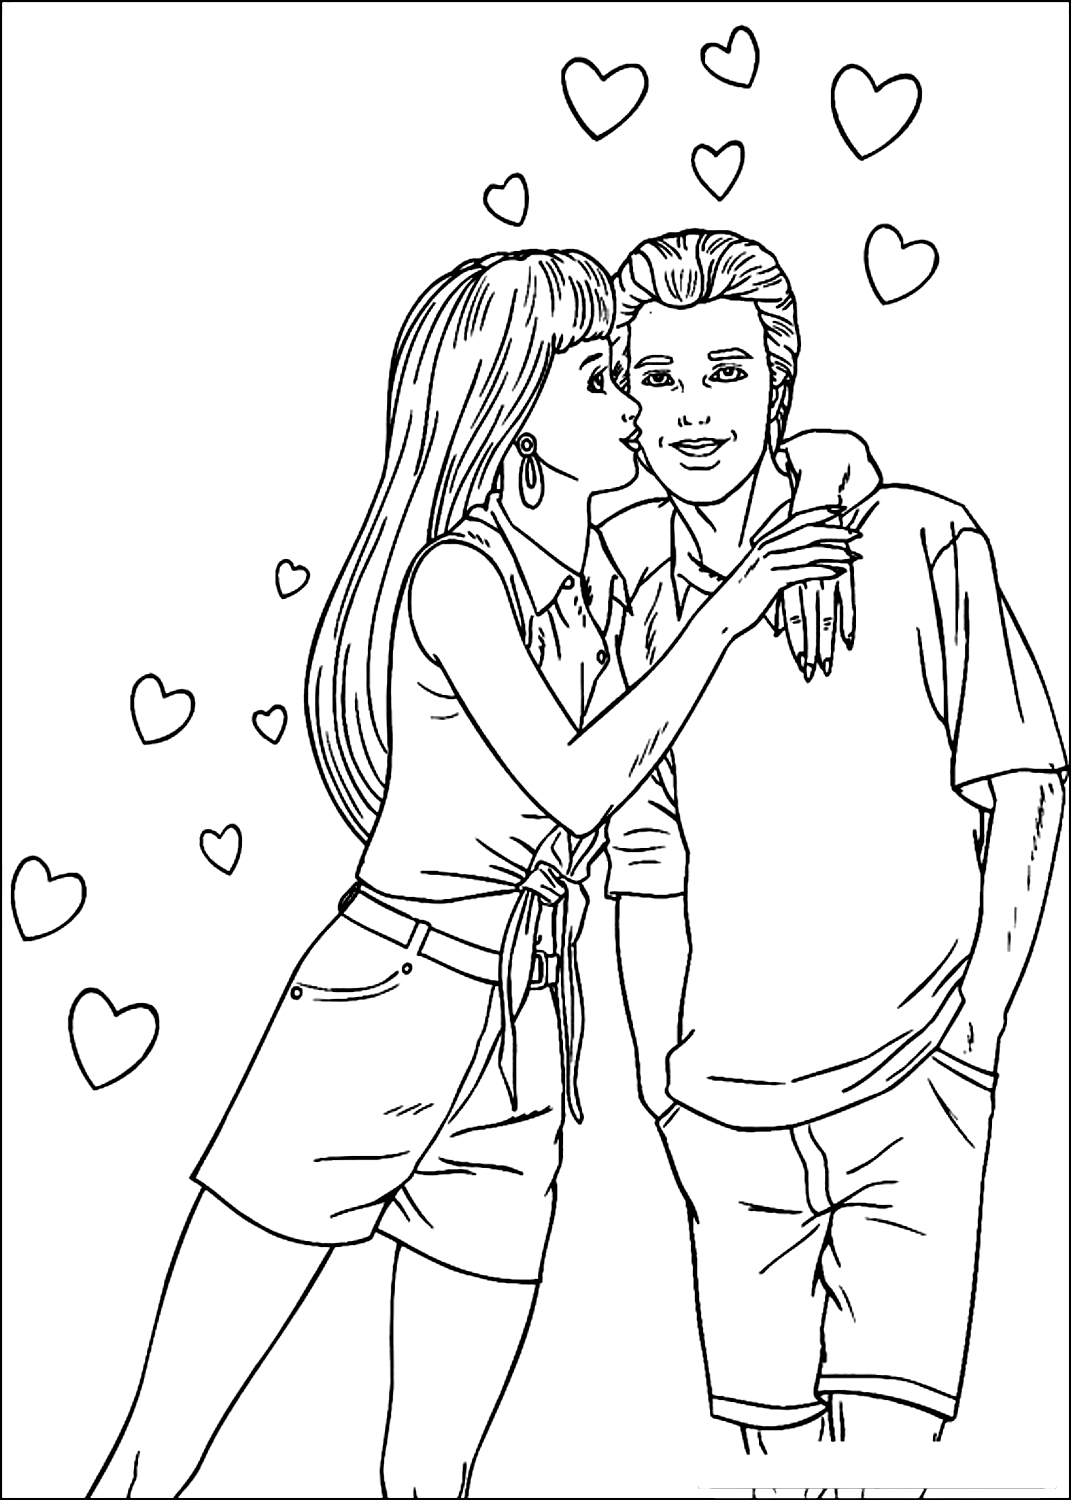 Barbie 41  coloring page to print and coloring